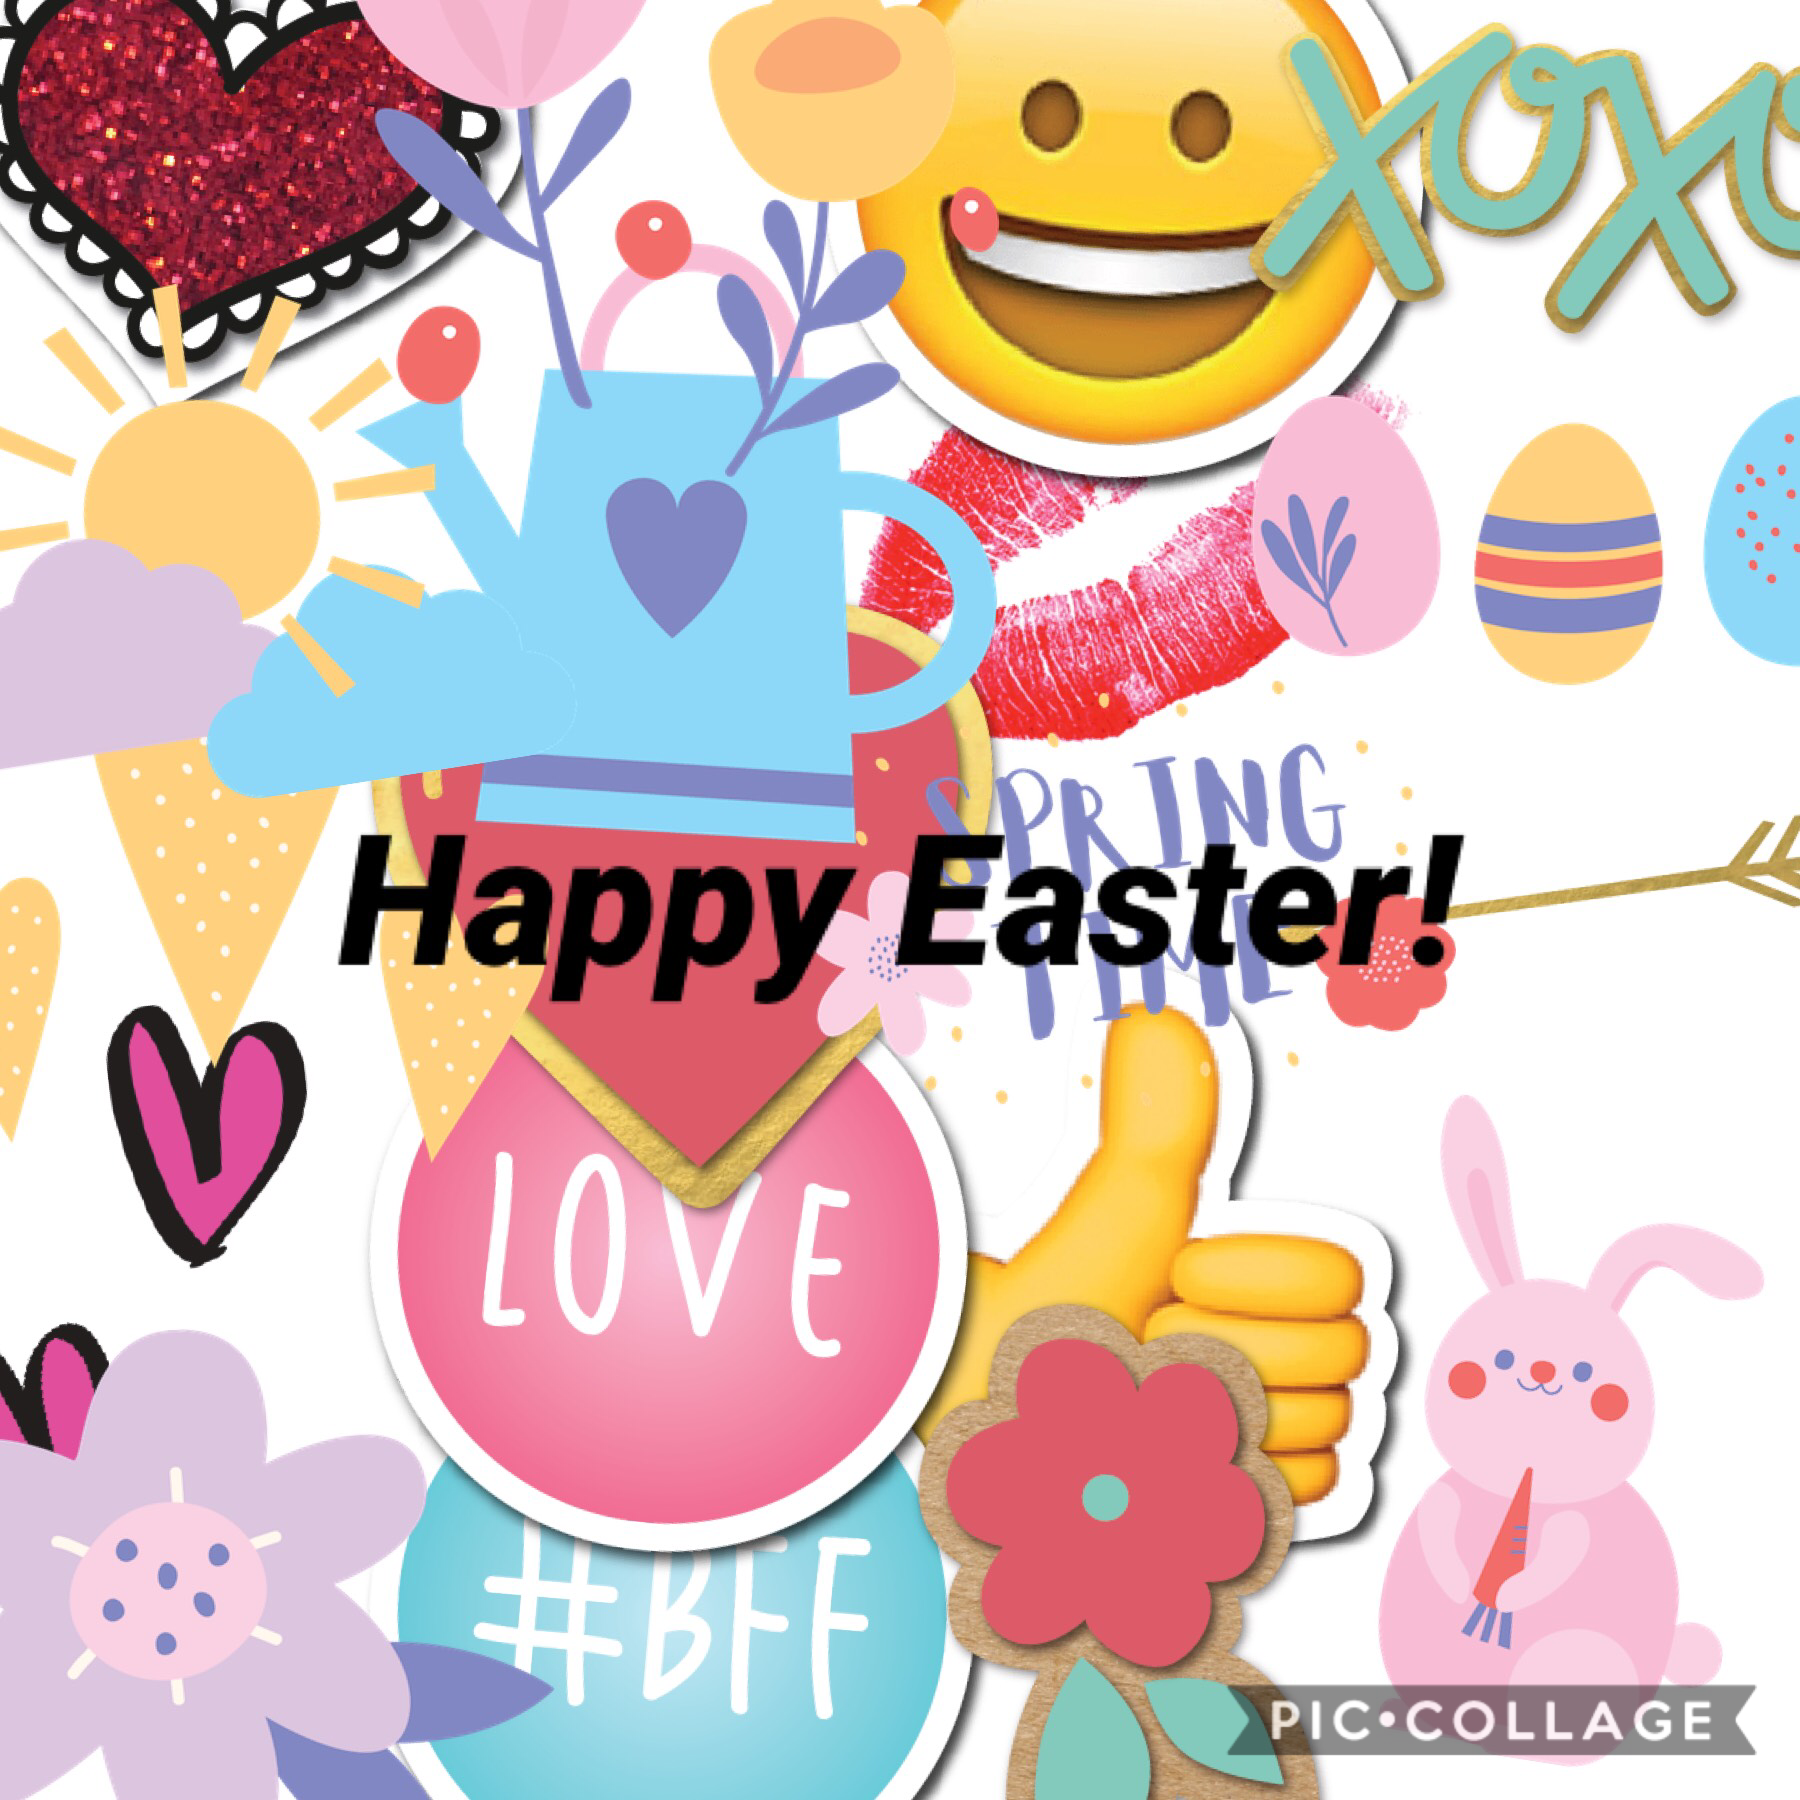 Happy Easter for all!

Its Sticker-Time in Pic Collage:

Here is a quest;
Make a Collage with cool Stickers in the Easter-Stile and send me that!

The Action Beginns on the Eastersunday, the 21st April 2019 and ends on Eastermonday, the 22nd April 2019!

